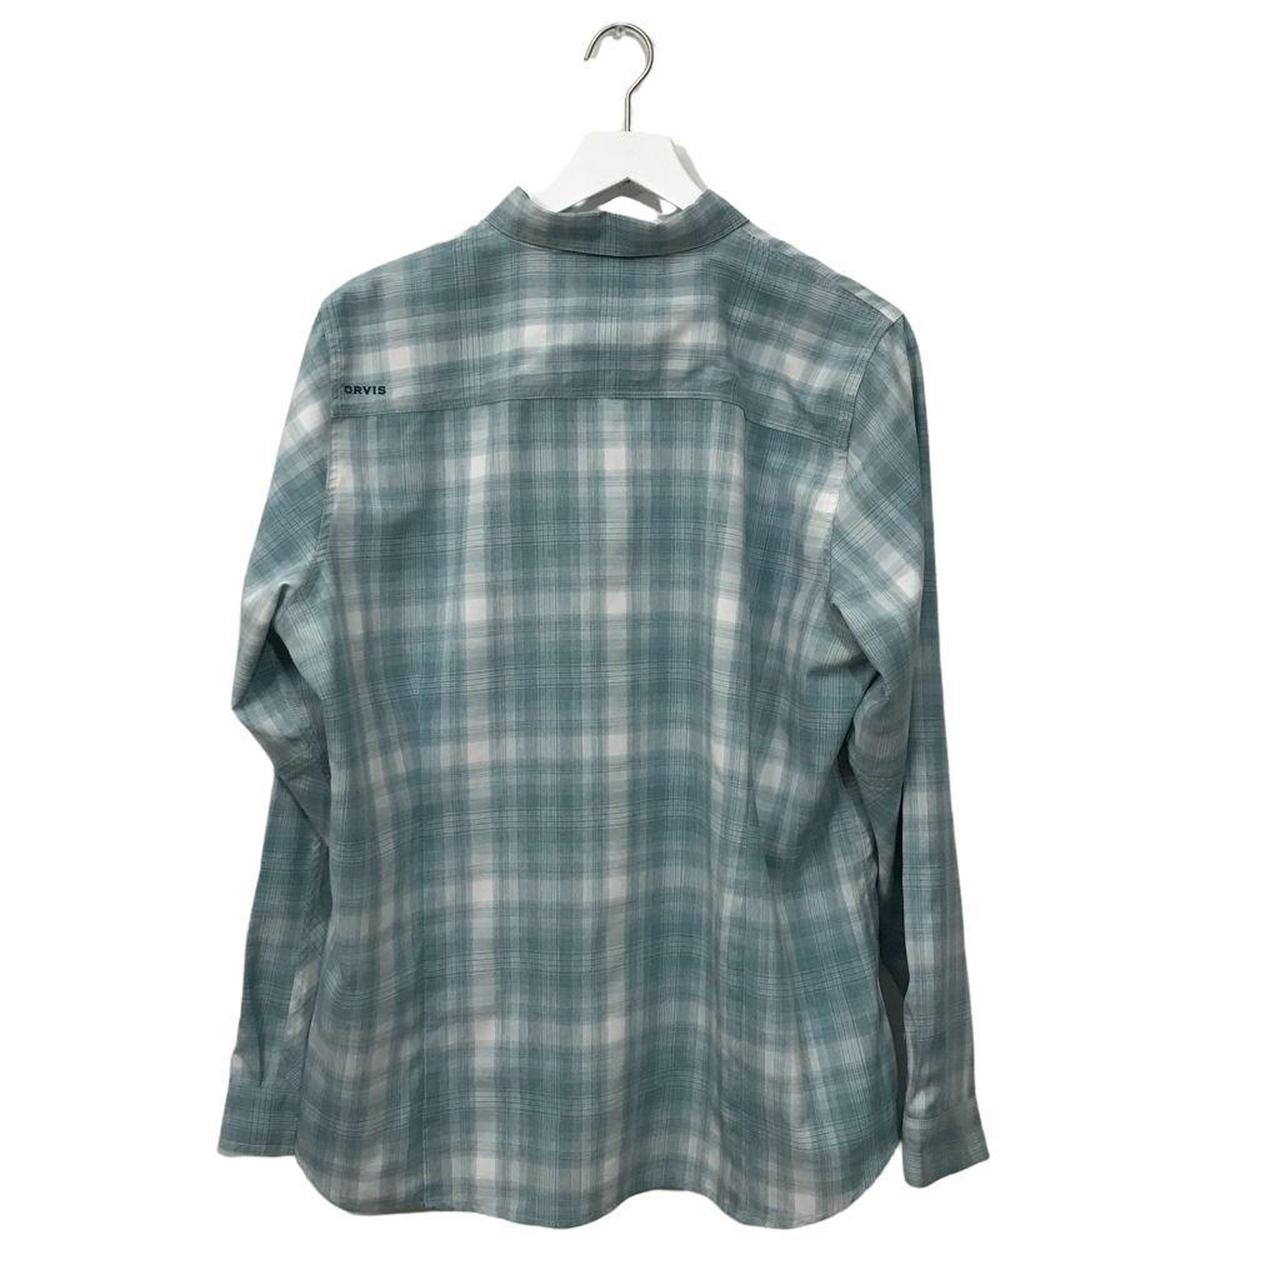 Product Image 2 - Mens button up long sleeve